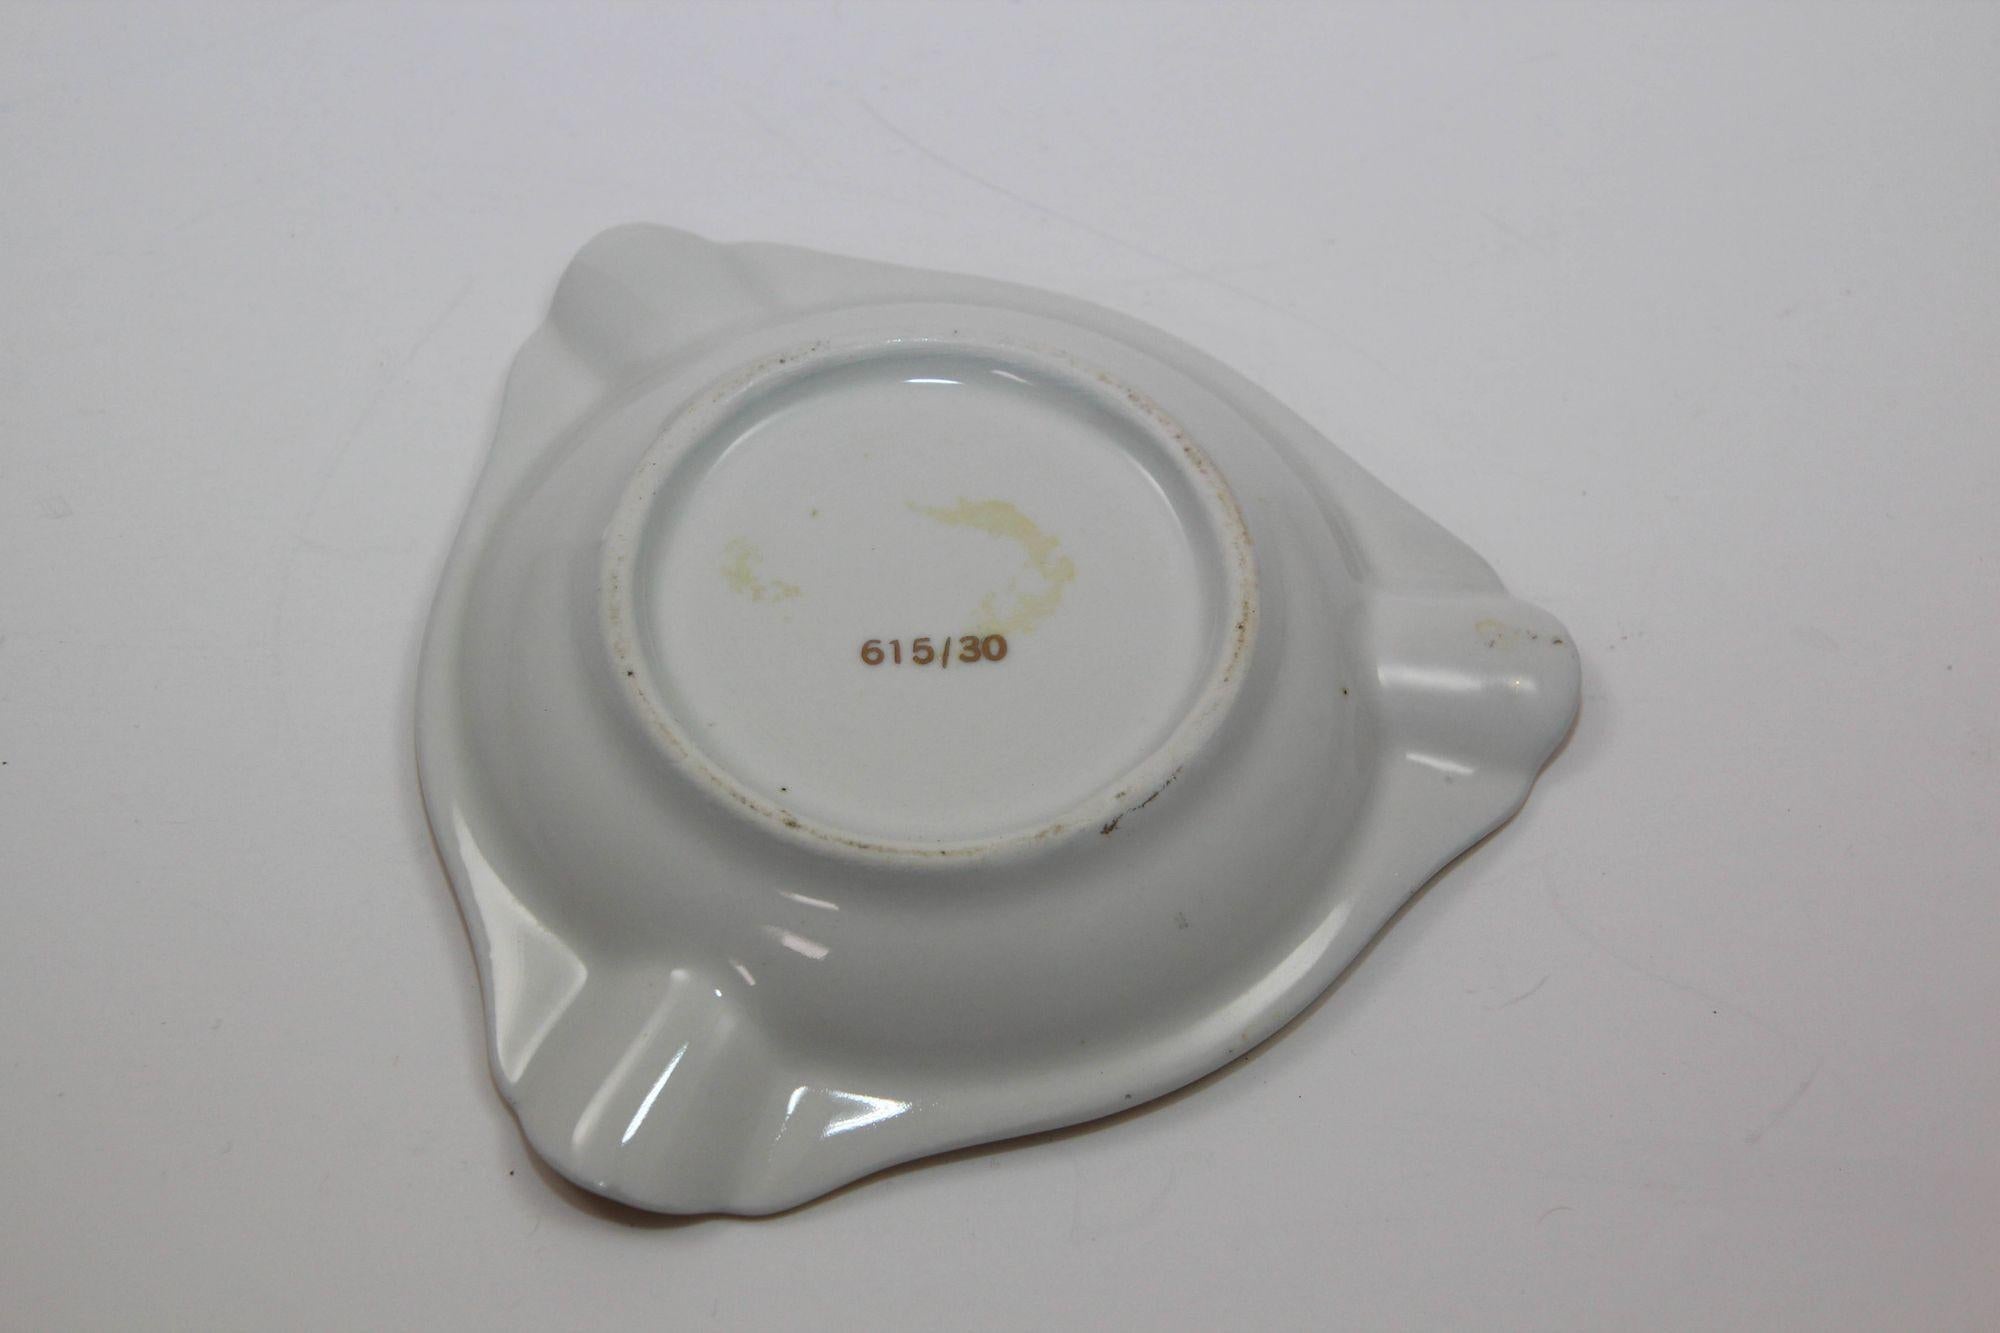 Vintage Made in Germany Souvenir Porcelain Ashtray Collectible Limited Edition For Sale 3